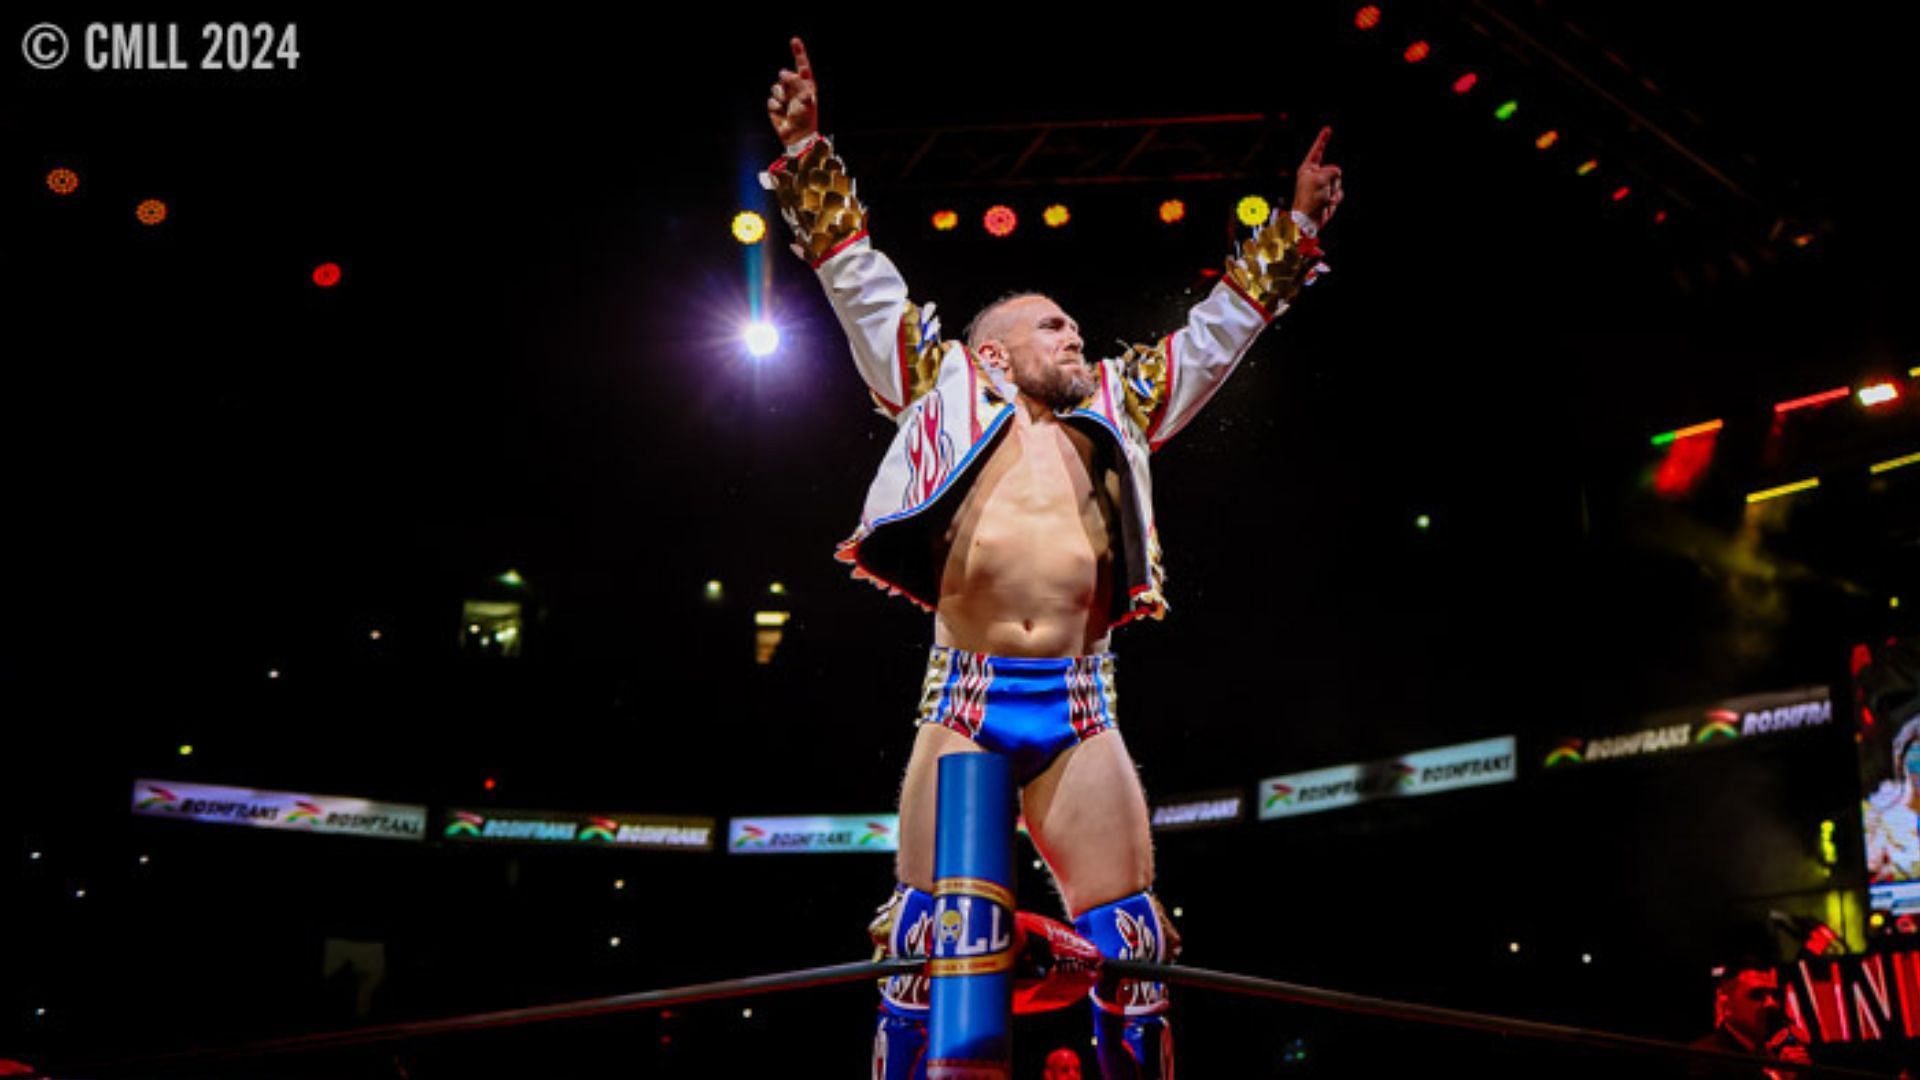 Bryan Danielson is a WWE Grand Slam Champion who is now with AEW [Photo courtesy of CMLL